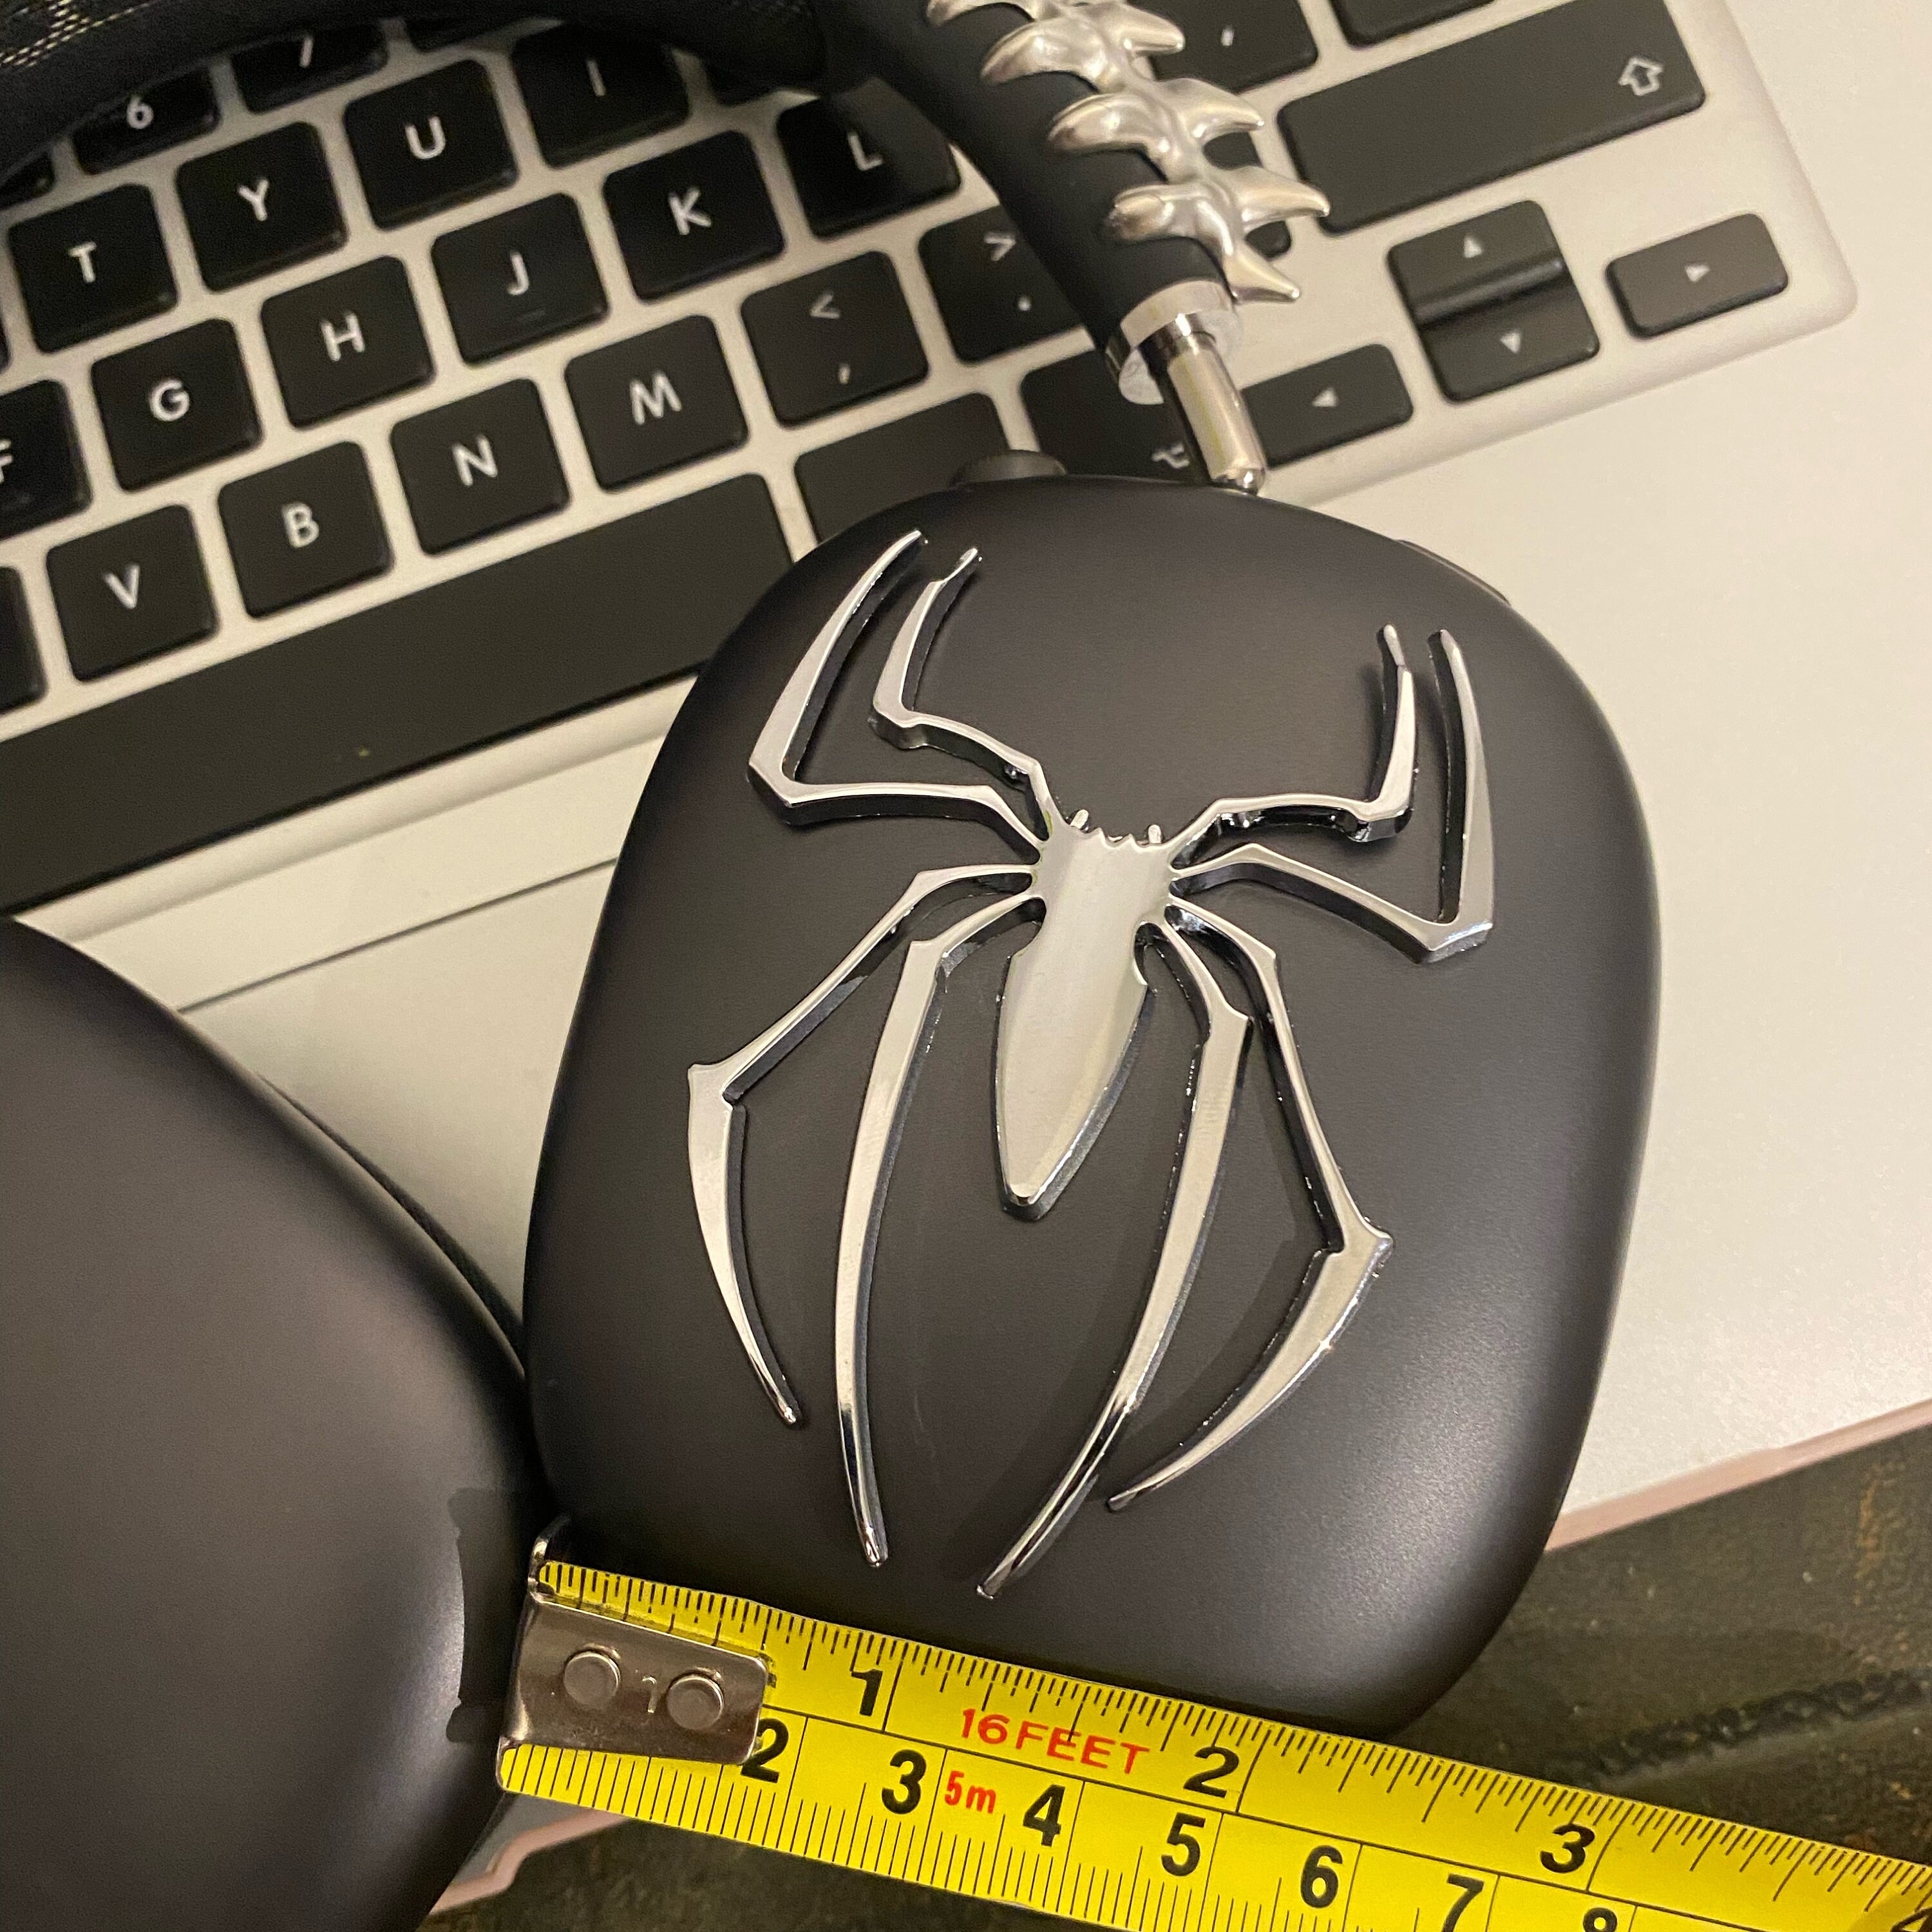 Spider Sony XM4 XM5, Skullcandy Headphones, Sony Headphone Attachment 2  Pcs, AirPod Max Attachment, Airpods Max Cover spiders Only 